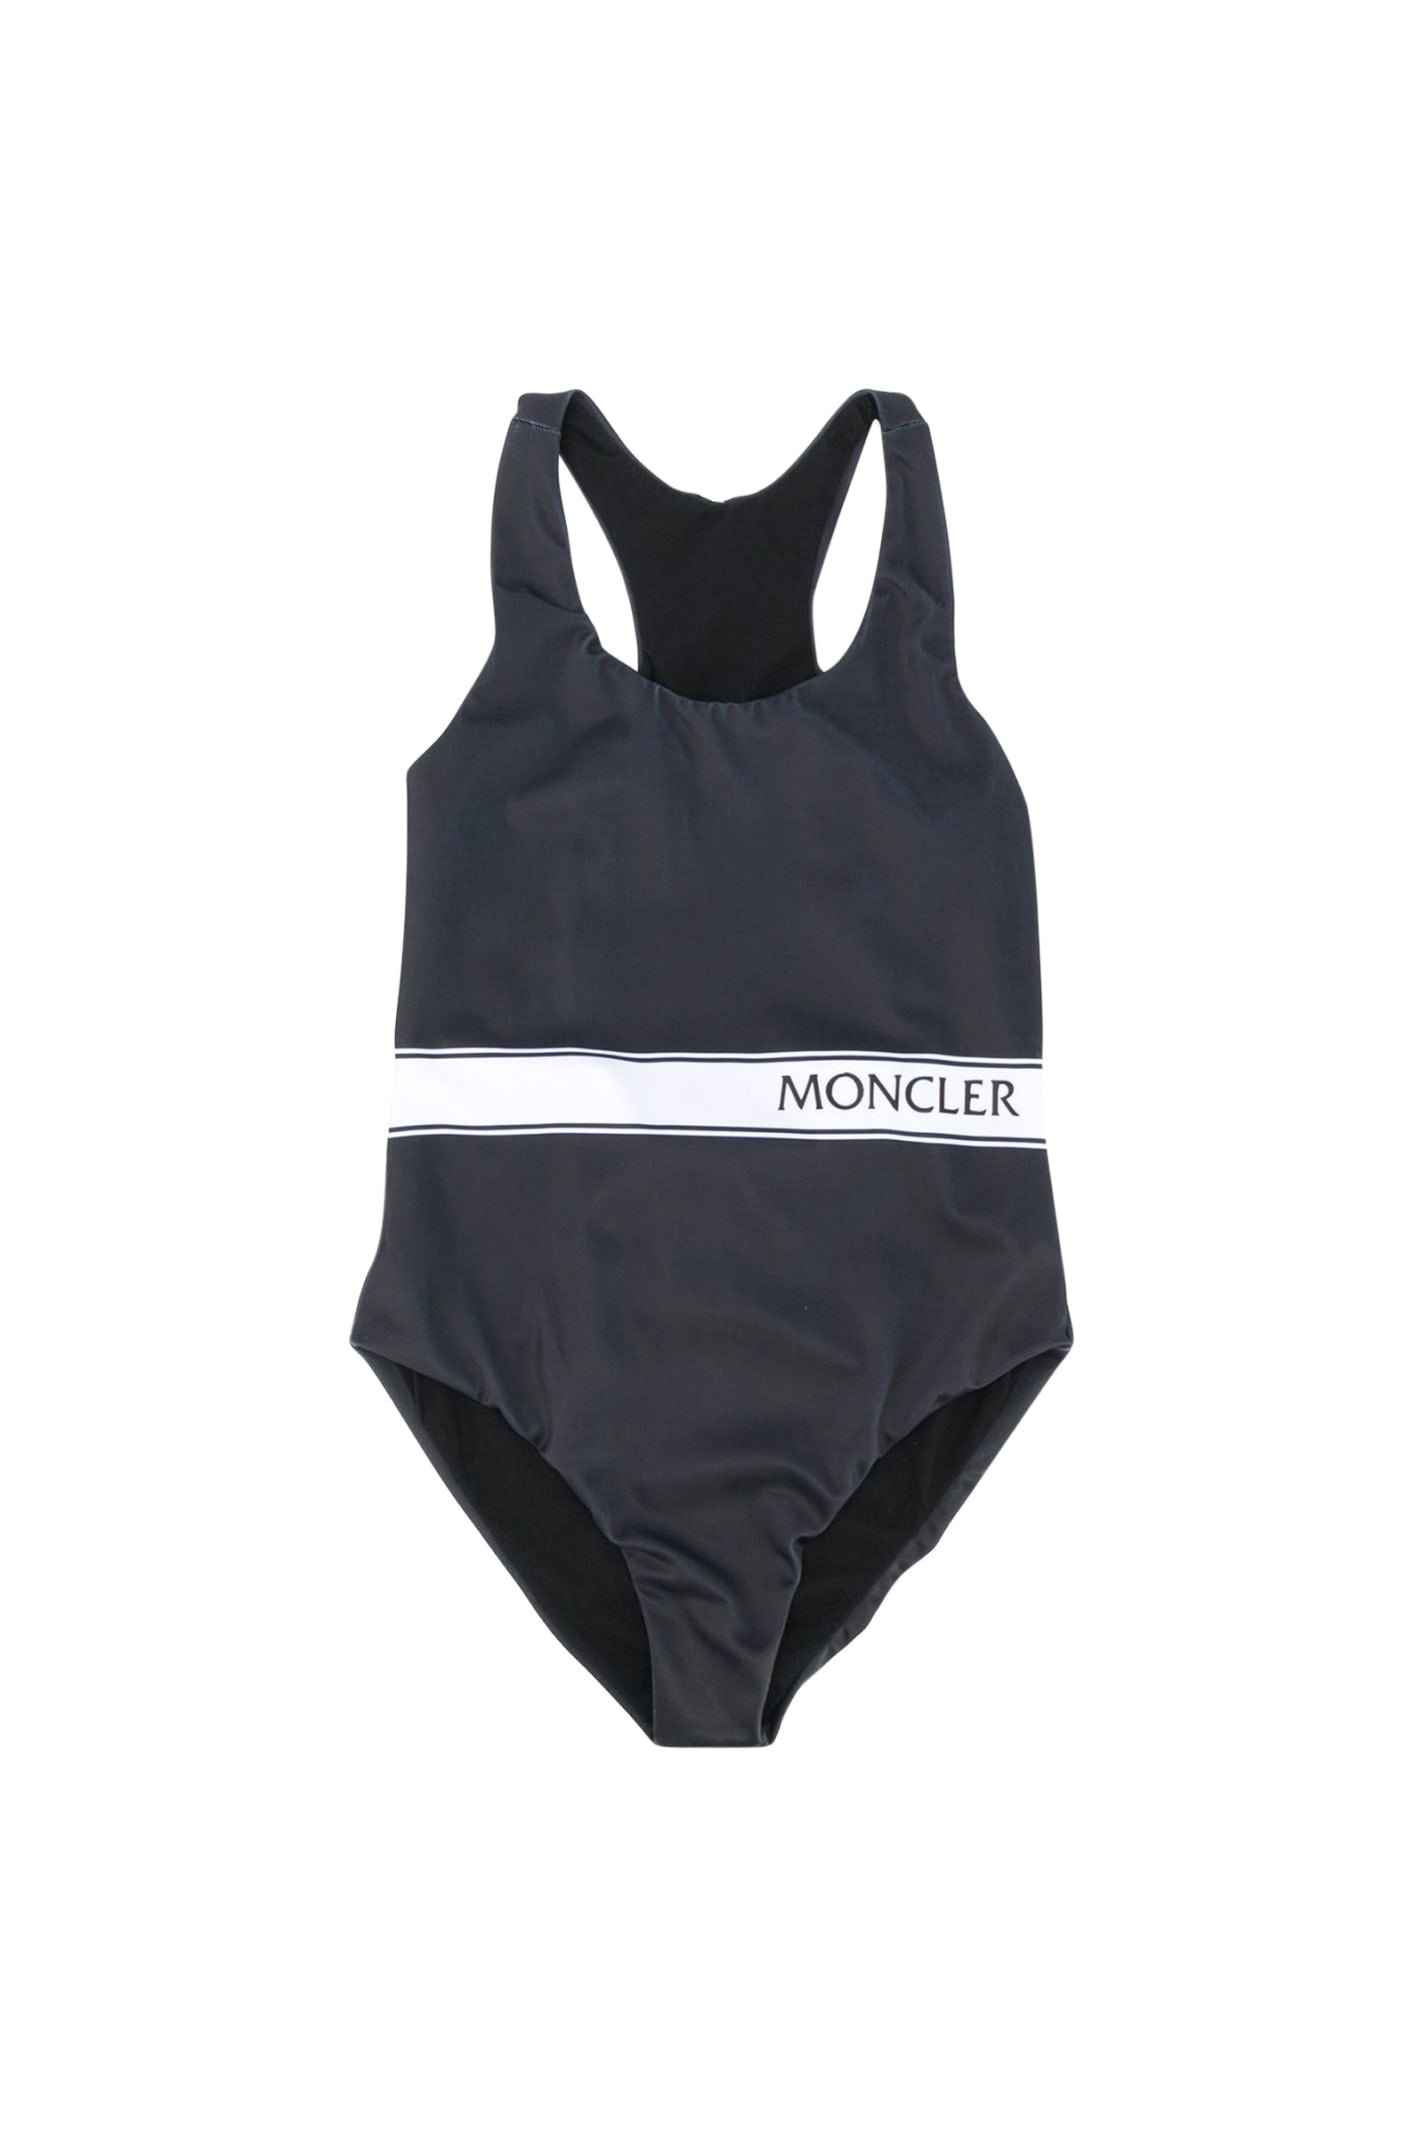 MONCLER ROUND-NECK ONE-PIECE SWIMSUIT,11263836